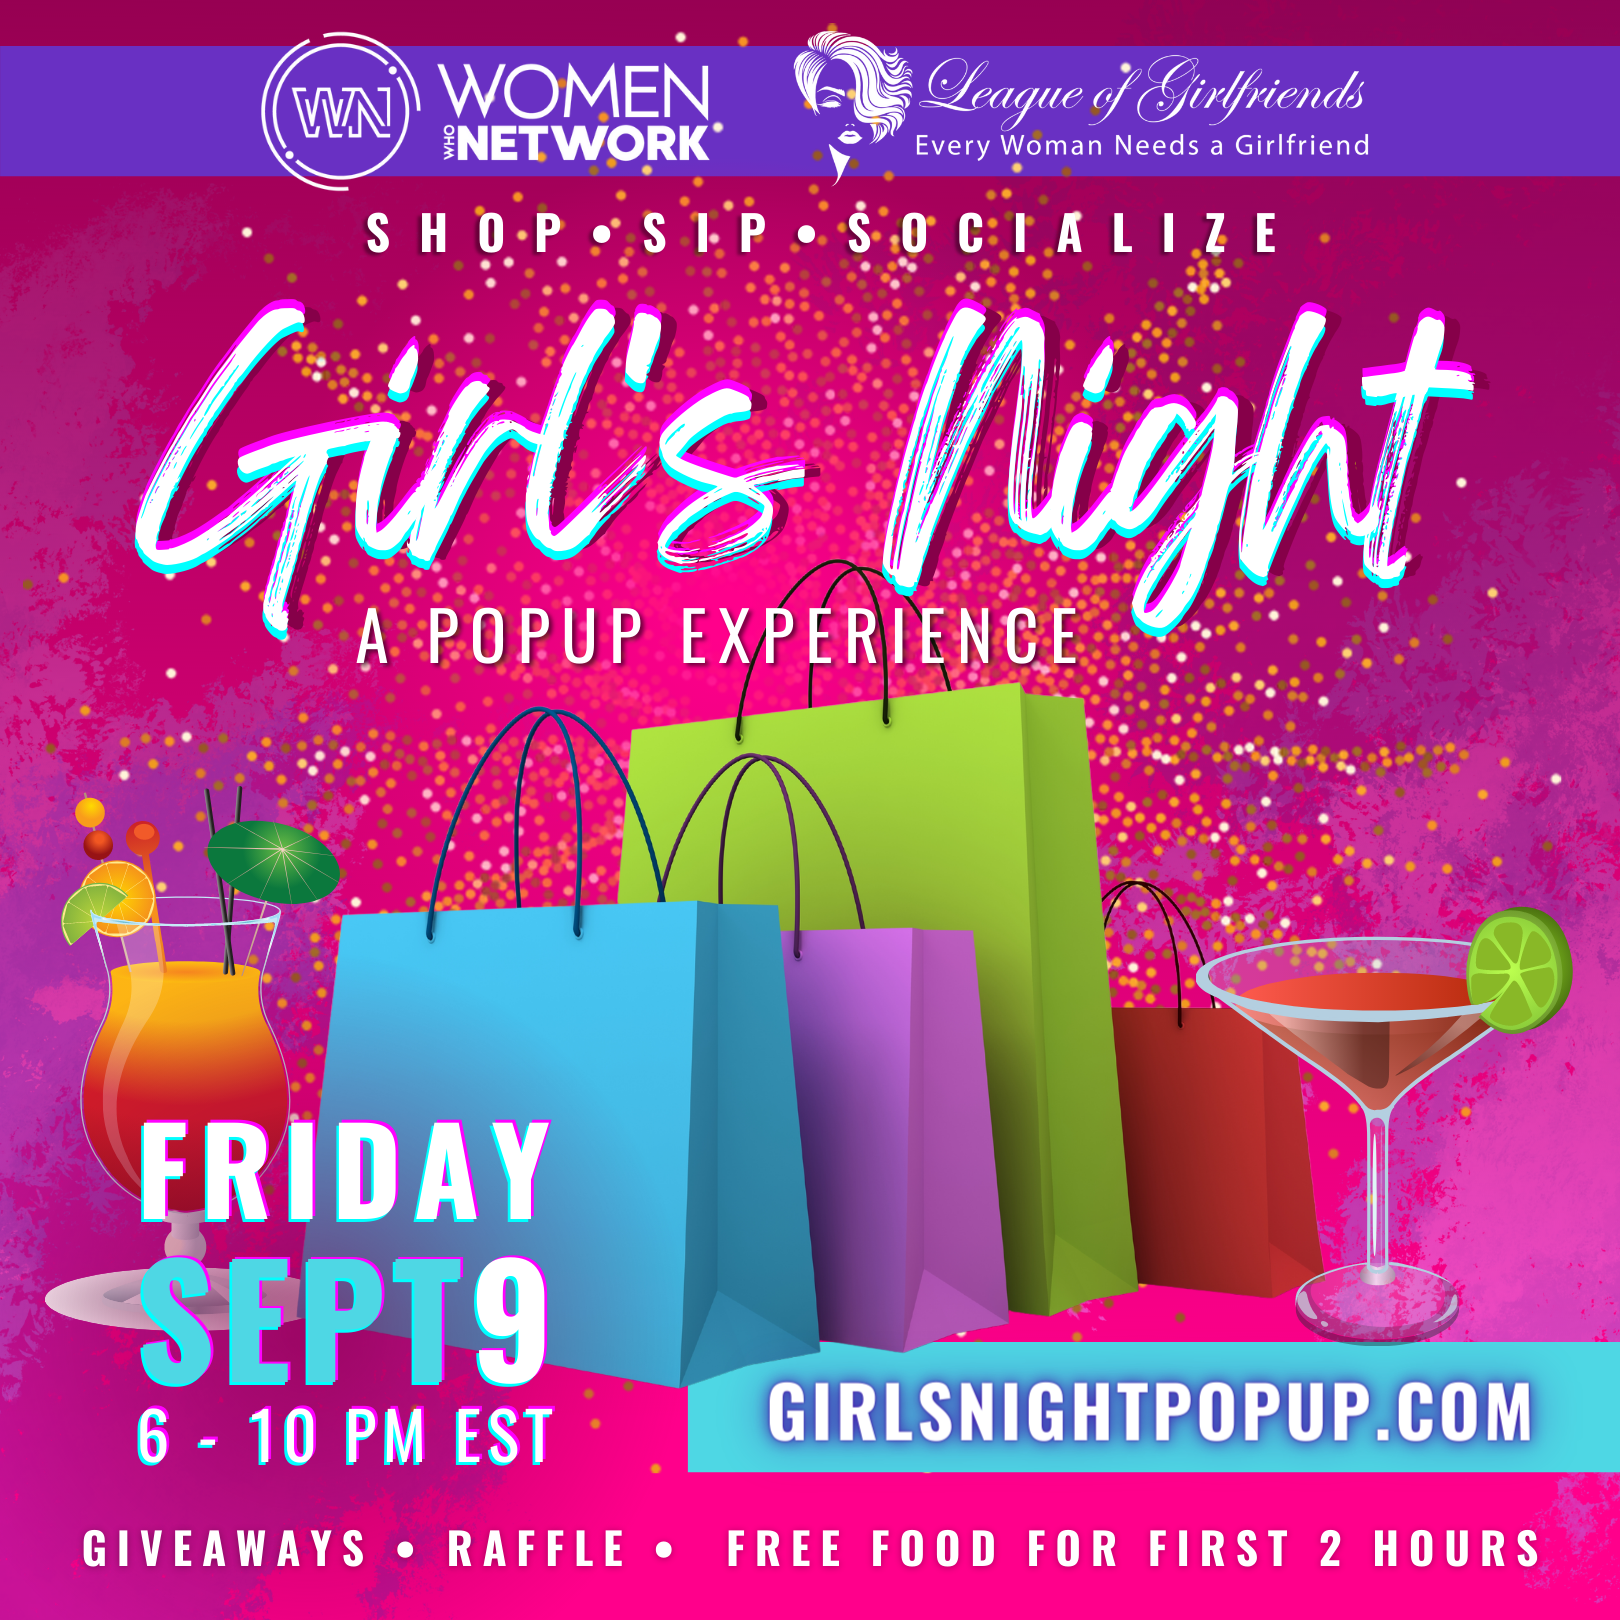 Girl's night Social event with women who network